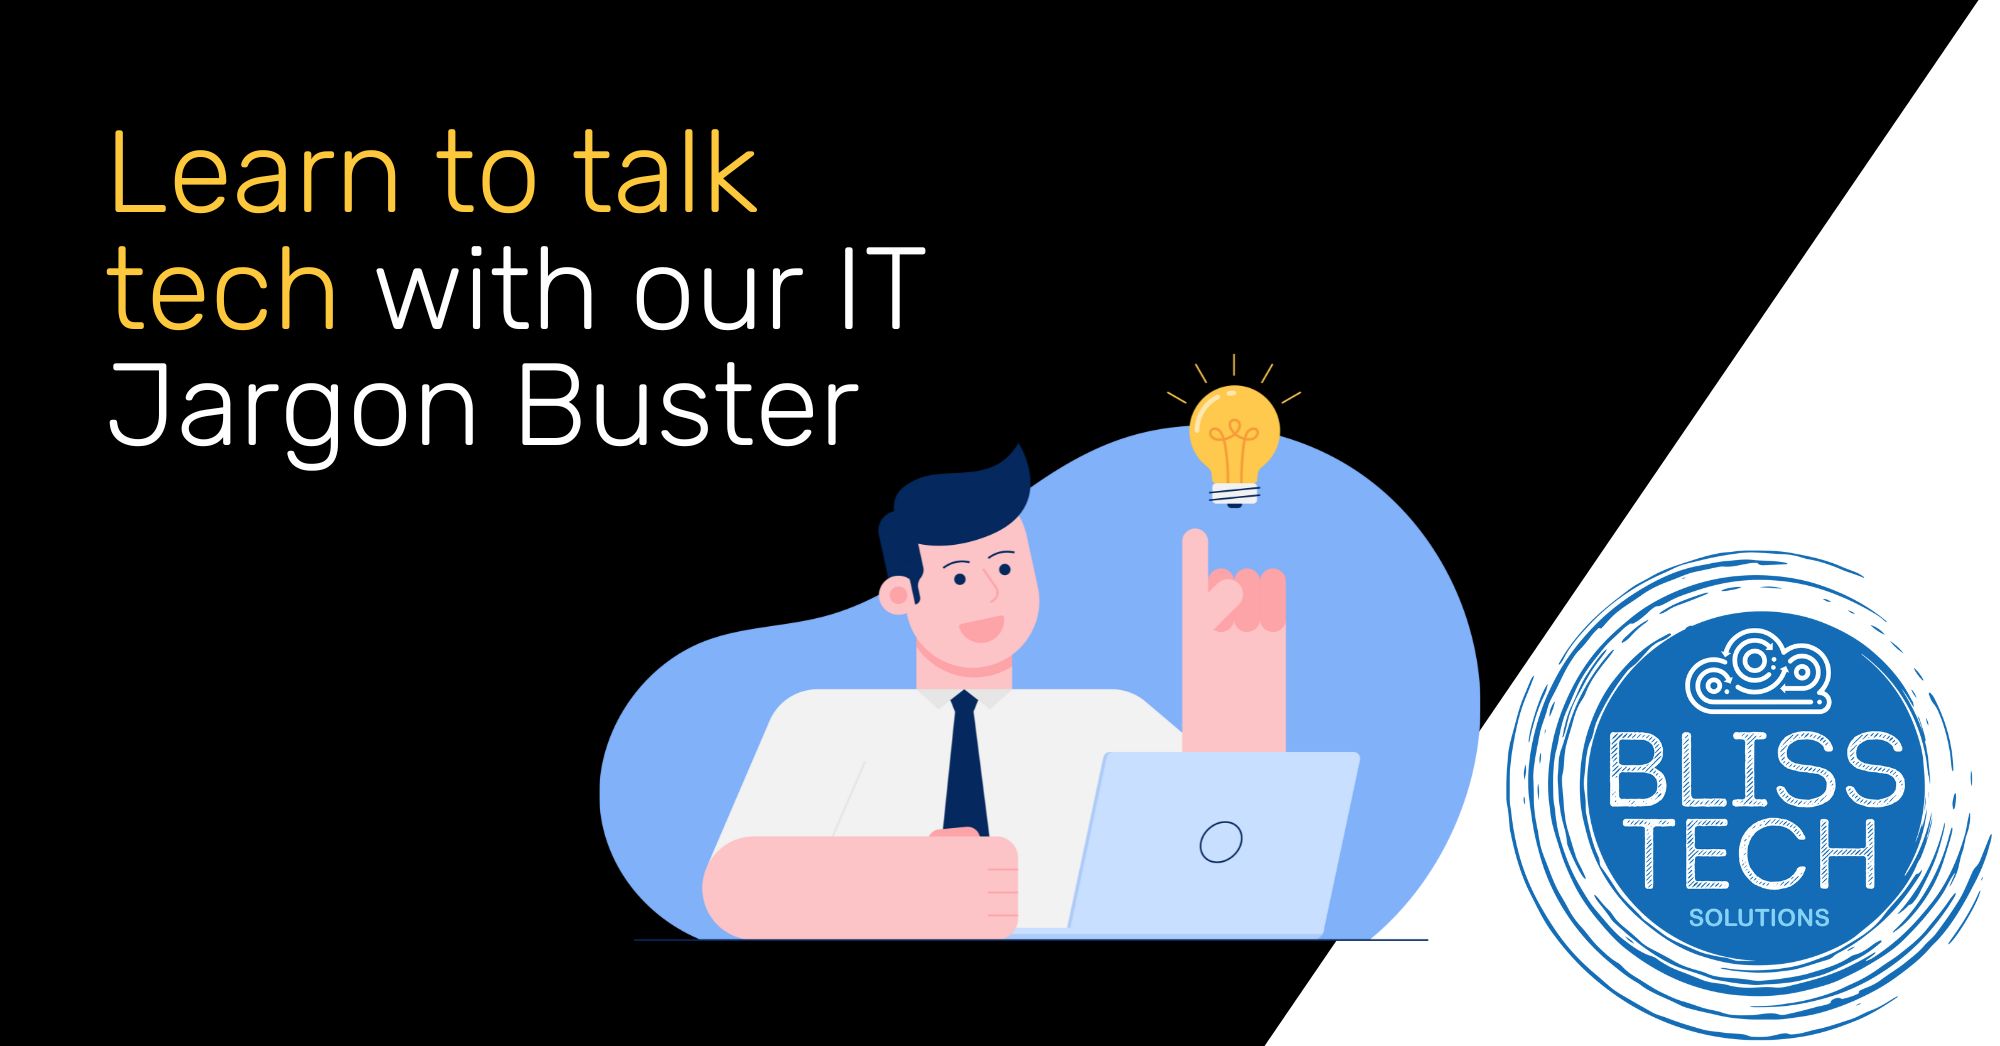 Learn how to talk tech with our Jargon Buster